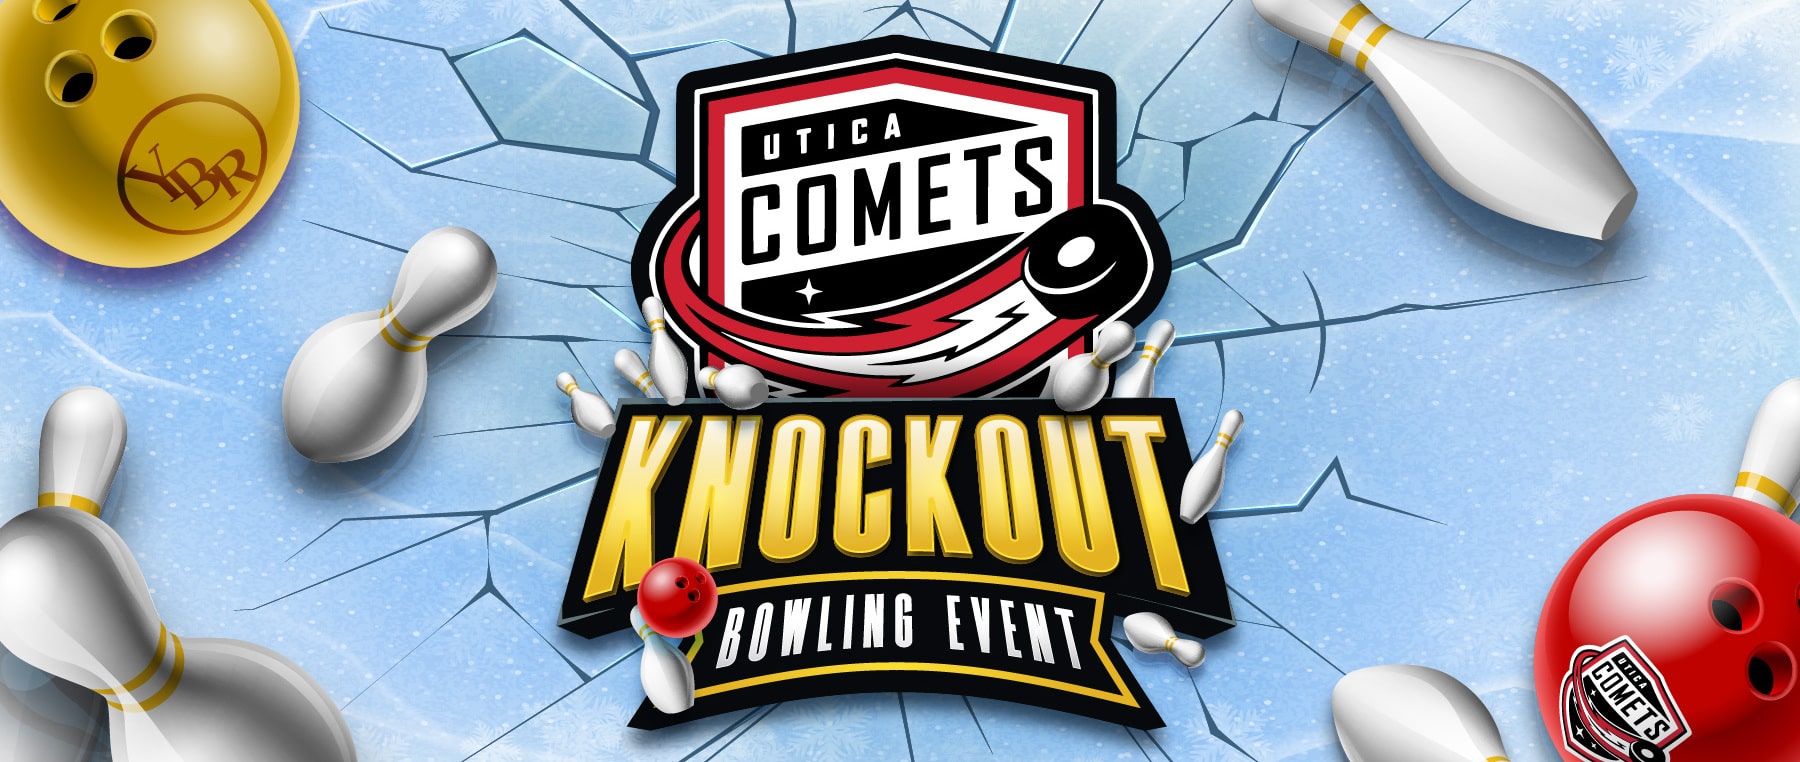 utica comets knockout bowling event